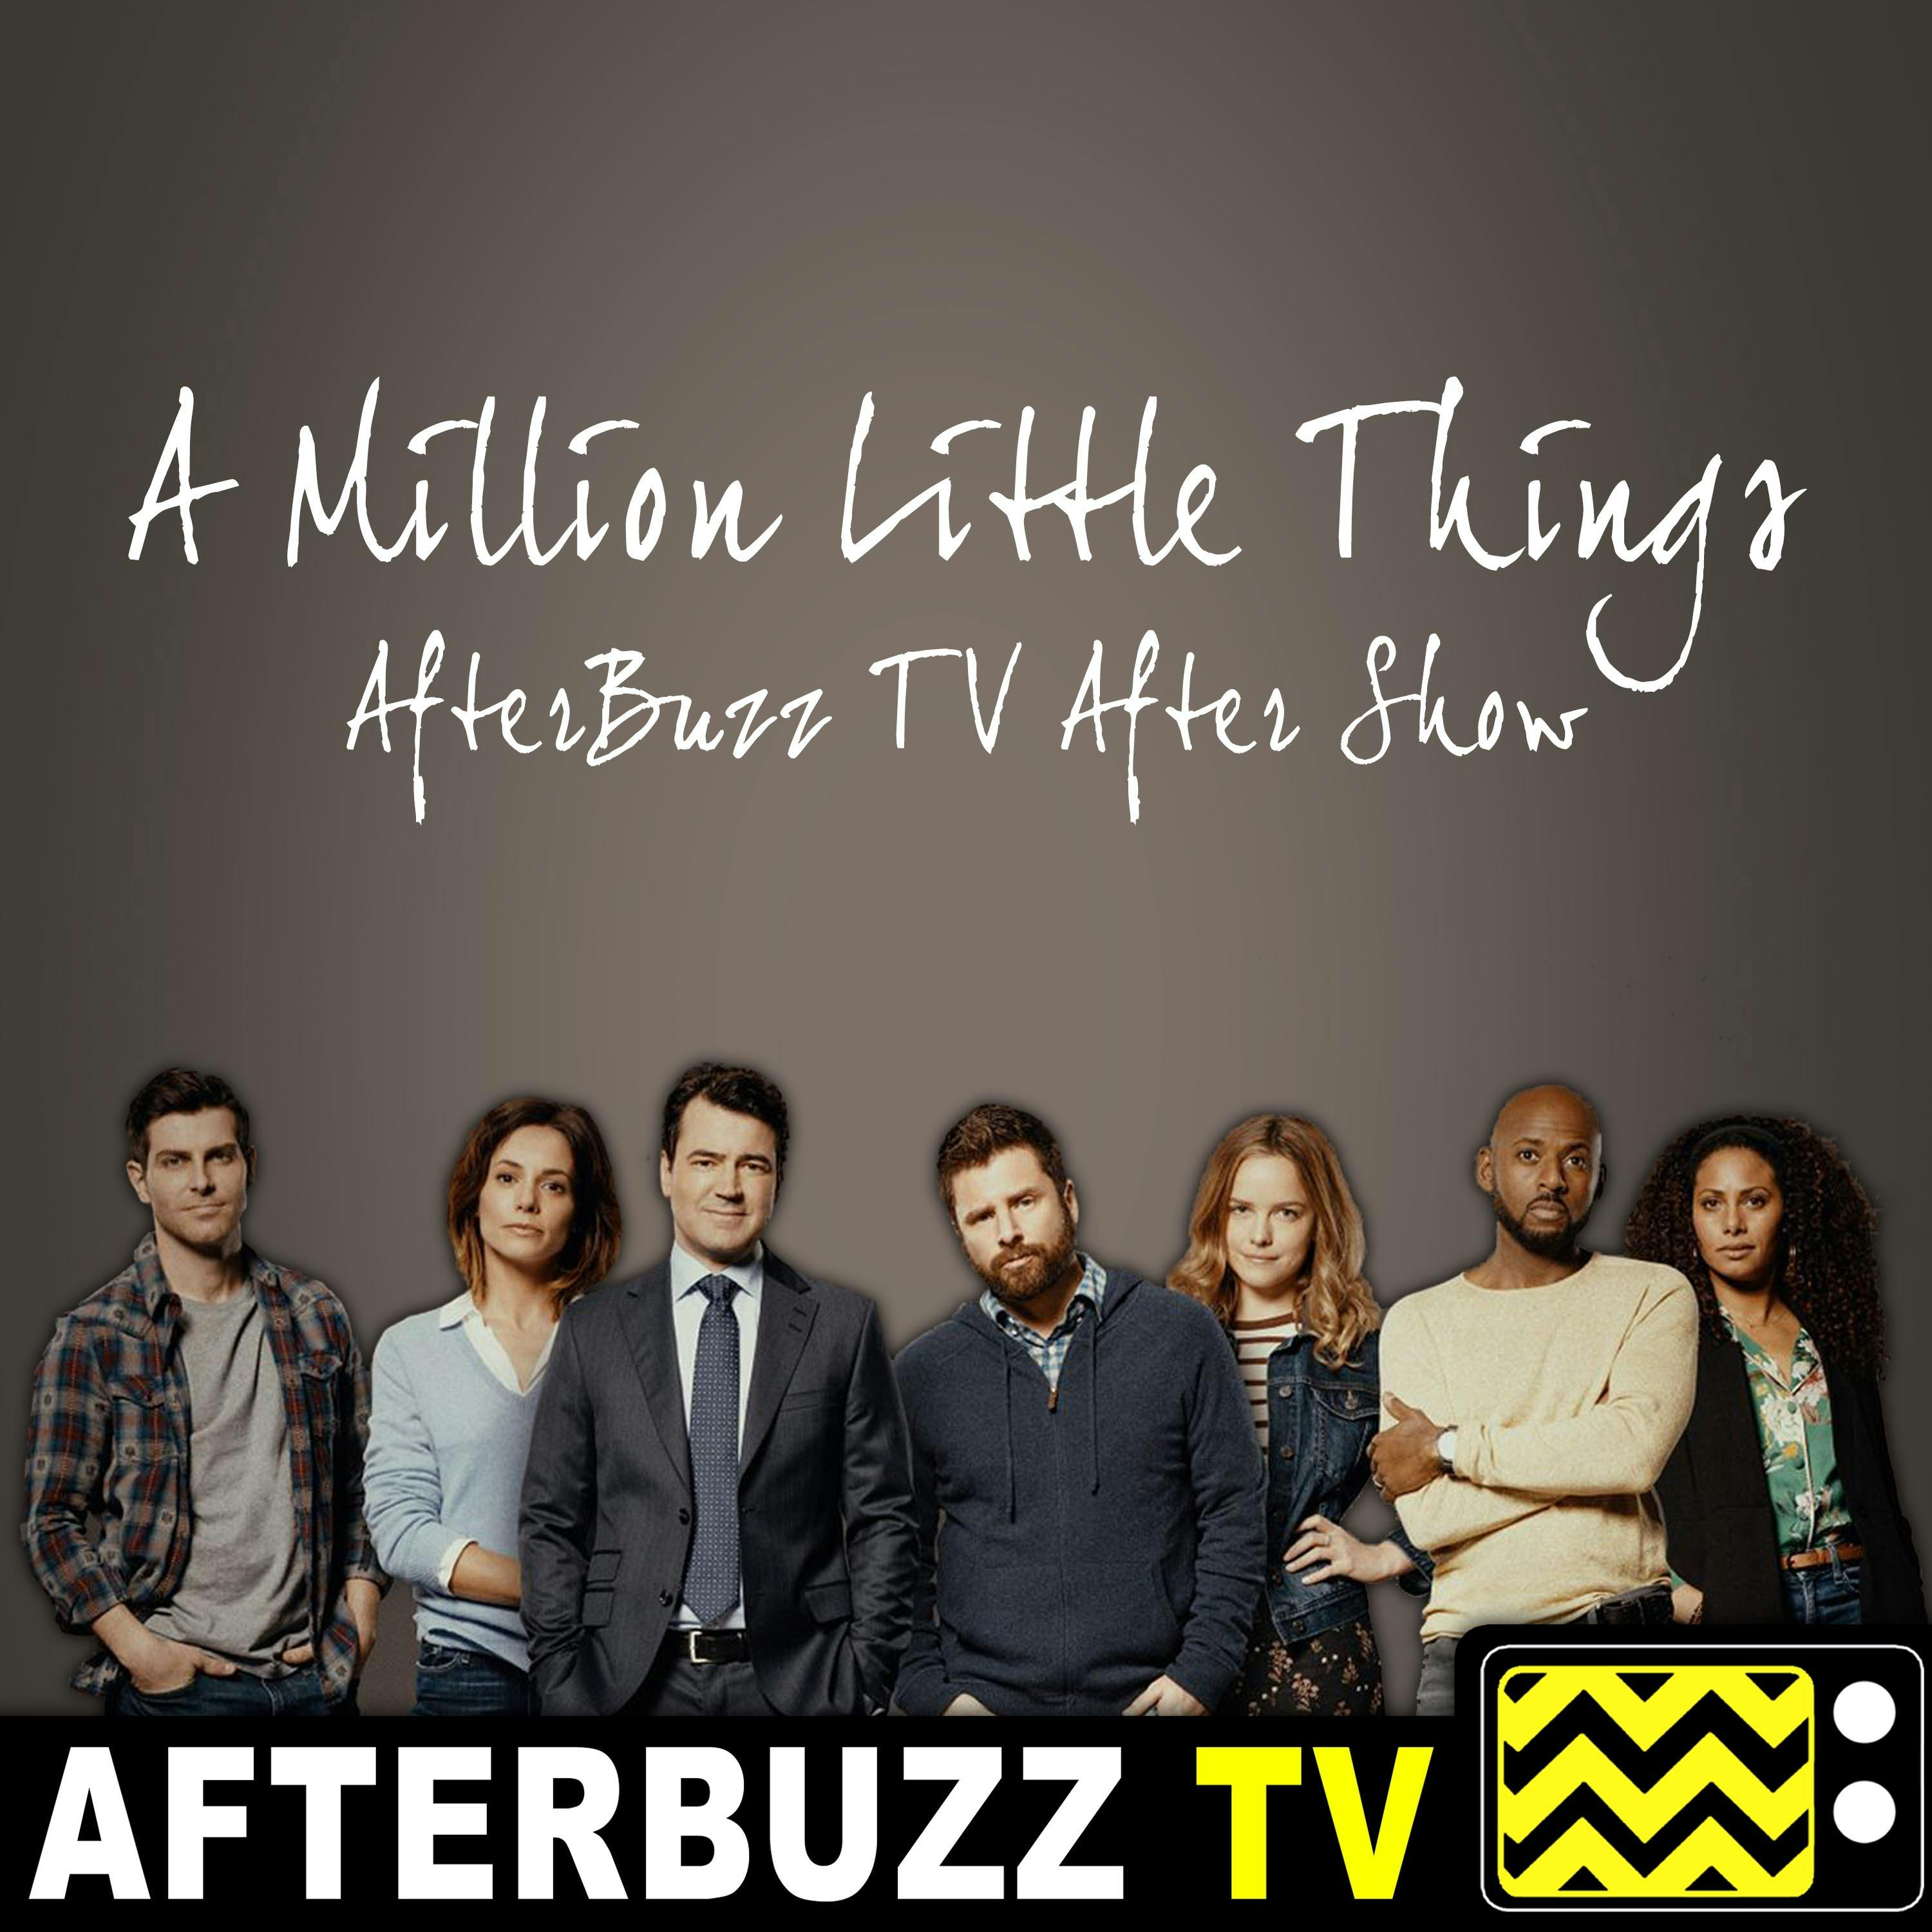 A Million Little Things S:1 Unexpected E:6